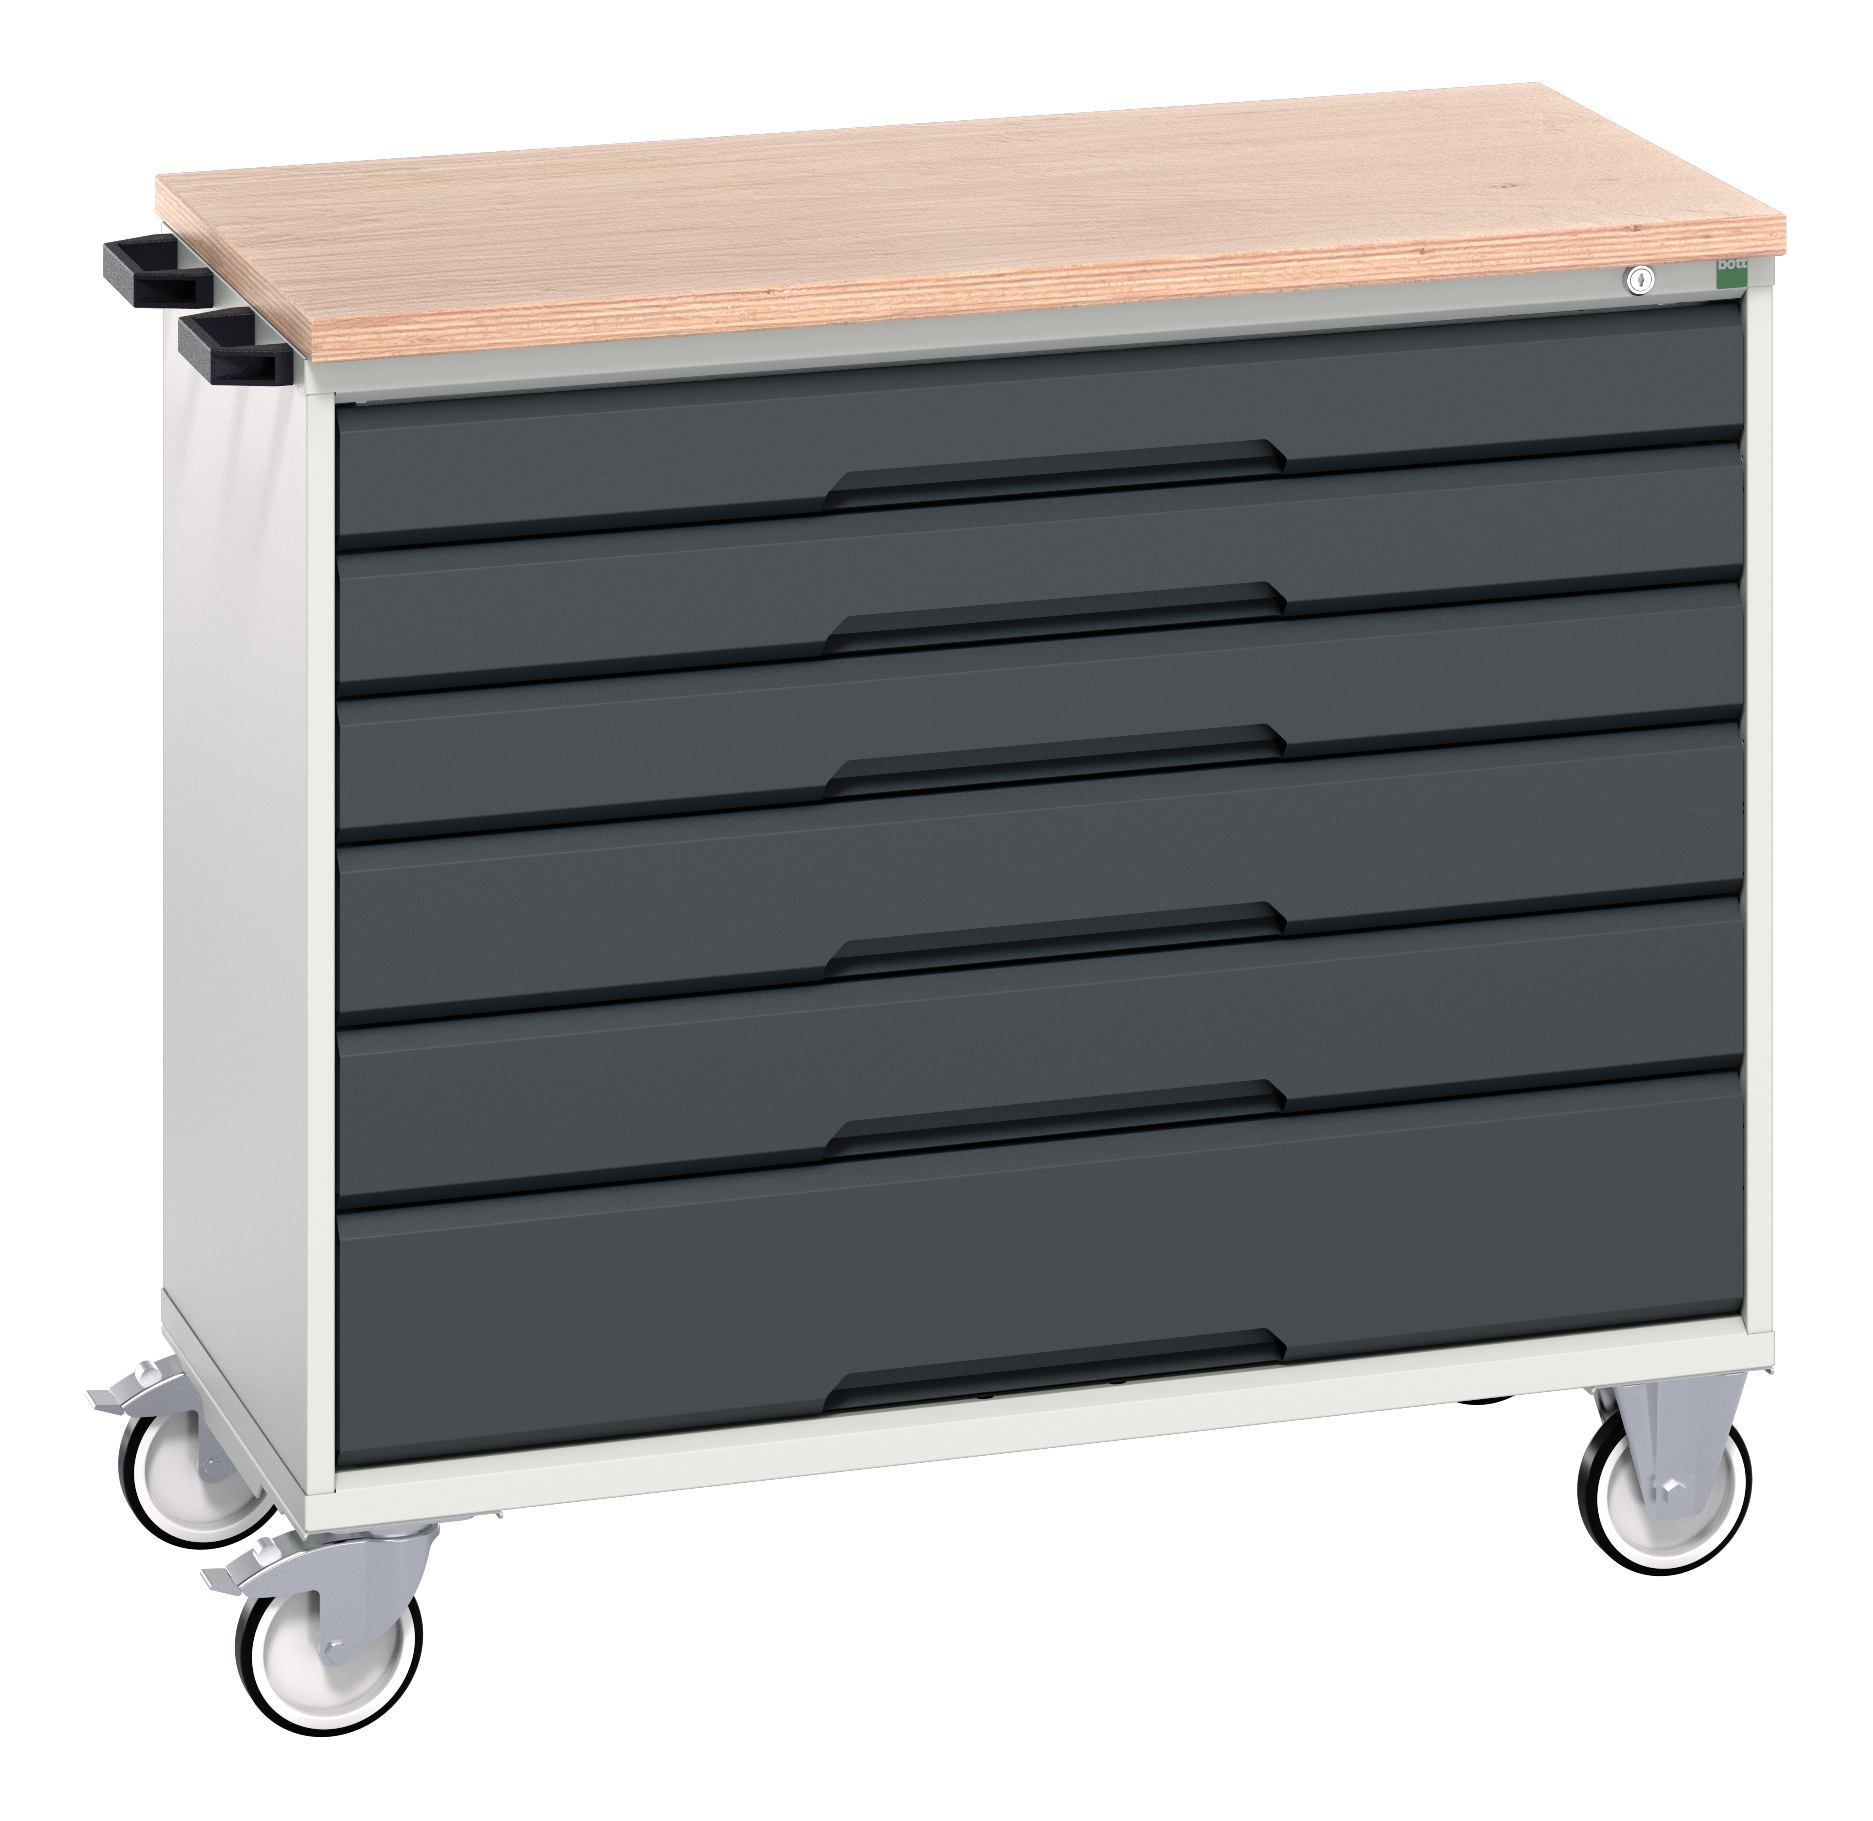 Bott Verso Mobile Drawer Cabinet With 6 Drawers & Multiplex Top - 16927054.19